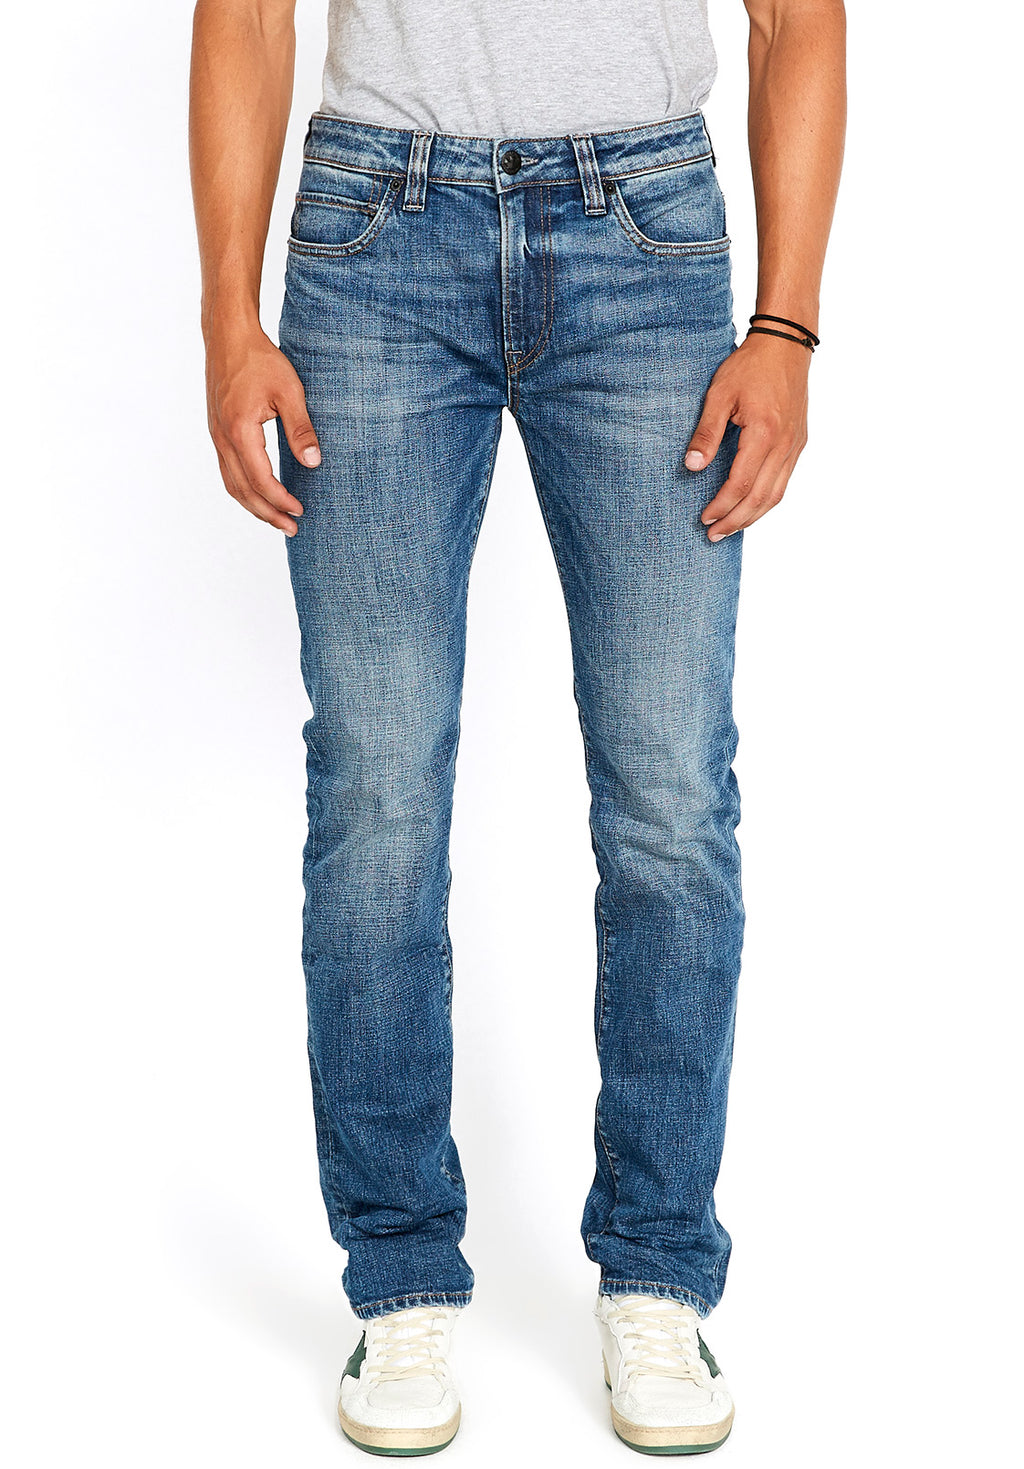 Occult Jeans - Cotton stretch narrow fit six pocket jeans. Style